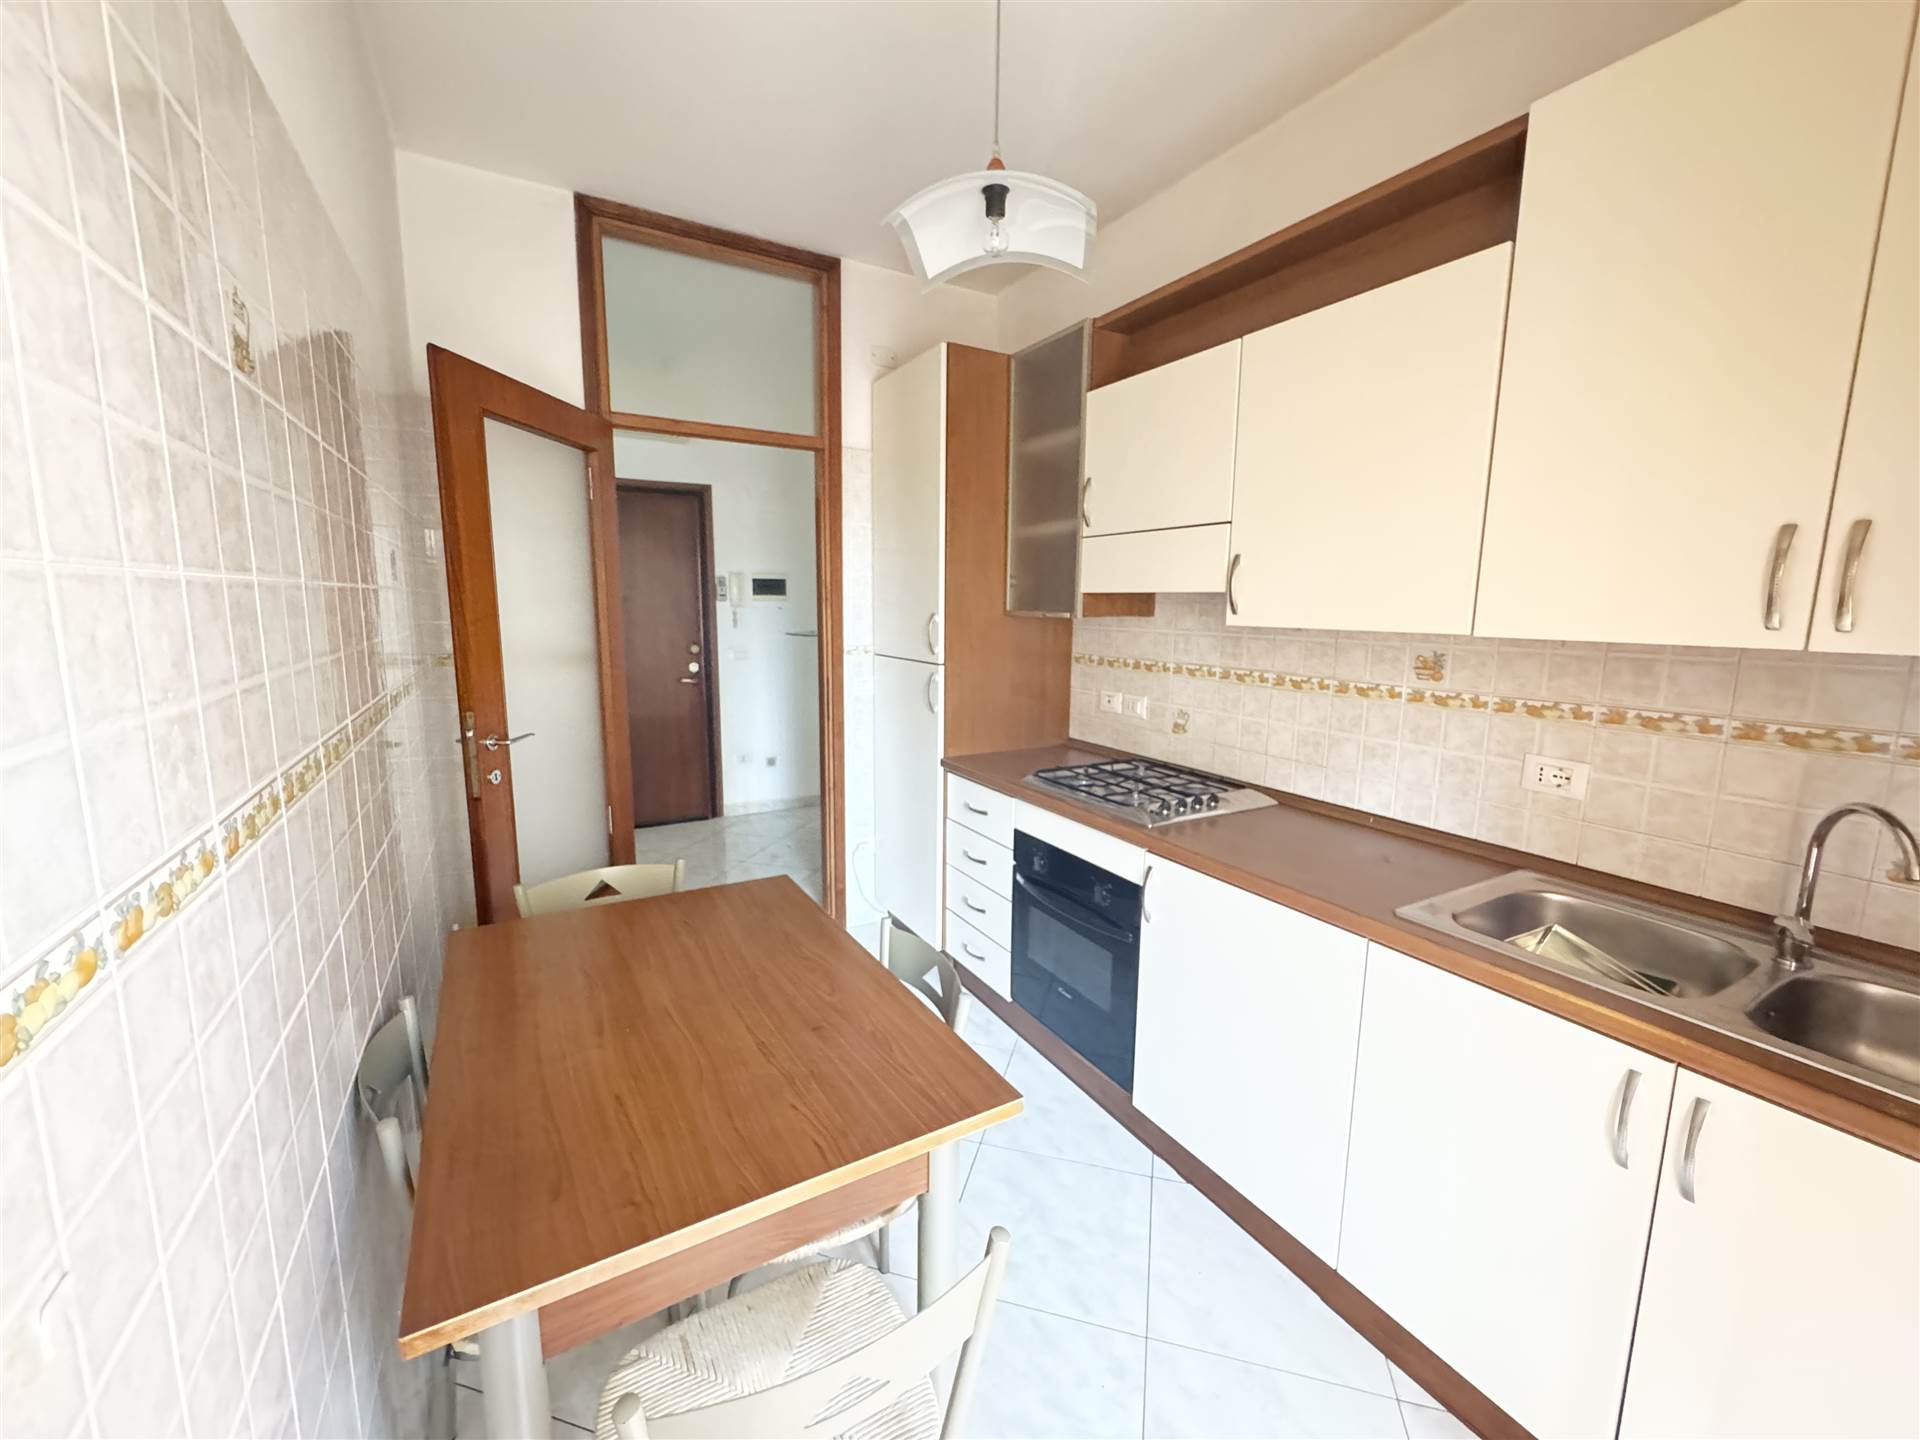 CANALI, CHIOGGIA, Apartment for sale of 90 Sq. mt., Habitable, Heating Individual heating system, Energetic class: E, Epi: 141,28 kwh/m2 year, placed 